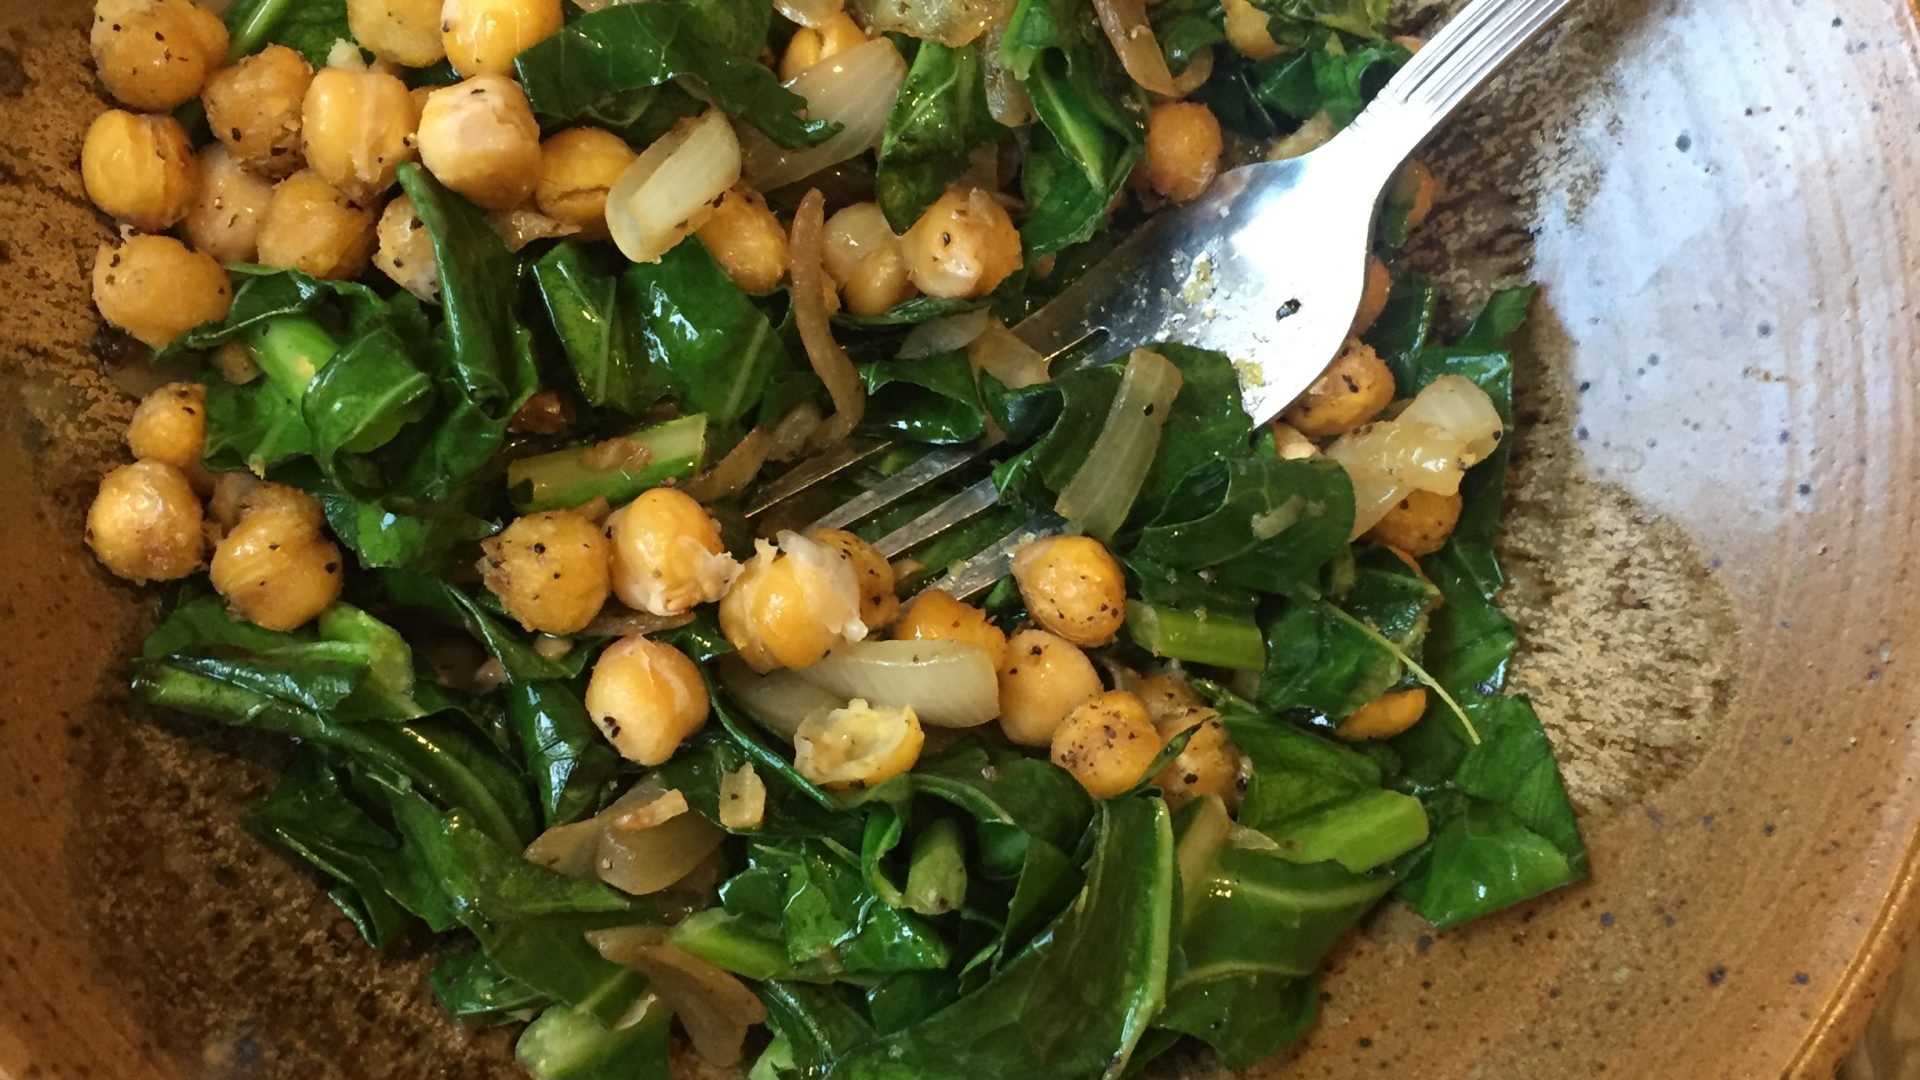 A picture of chickpeas and collard greens